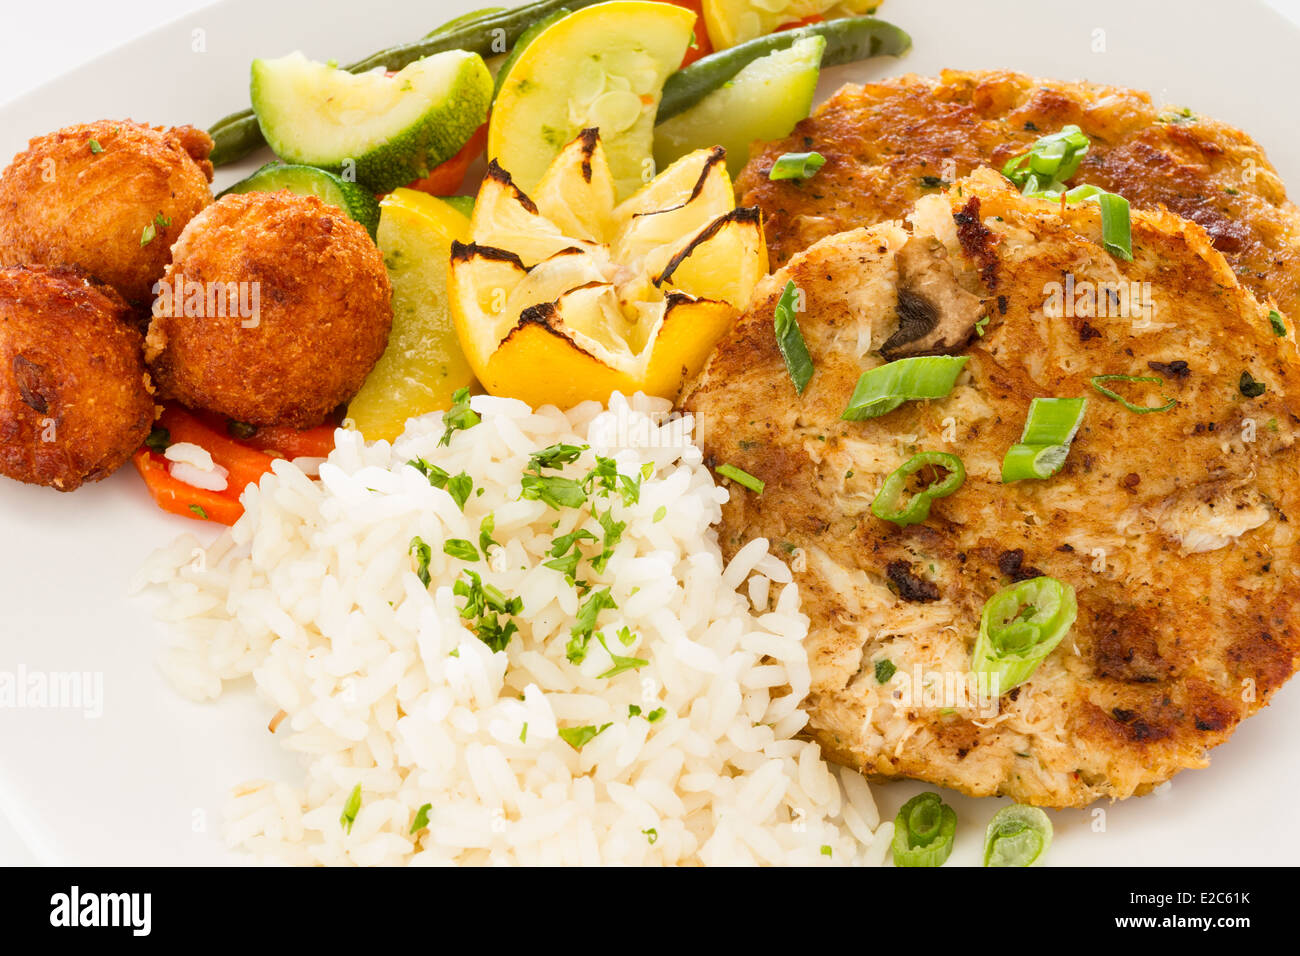 Pan fried crab cake sandwich served with a side of rice, vegetable medley and hush puppies. Stock Photo